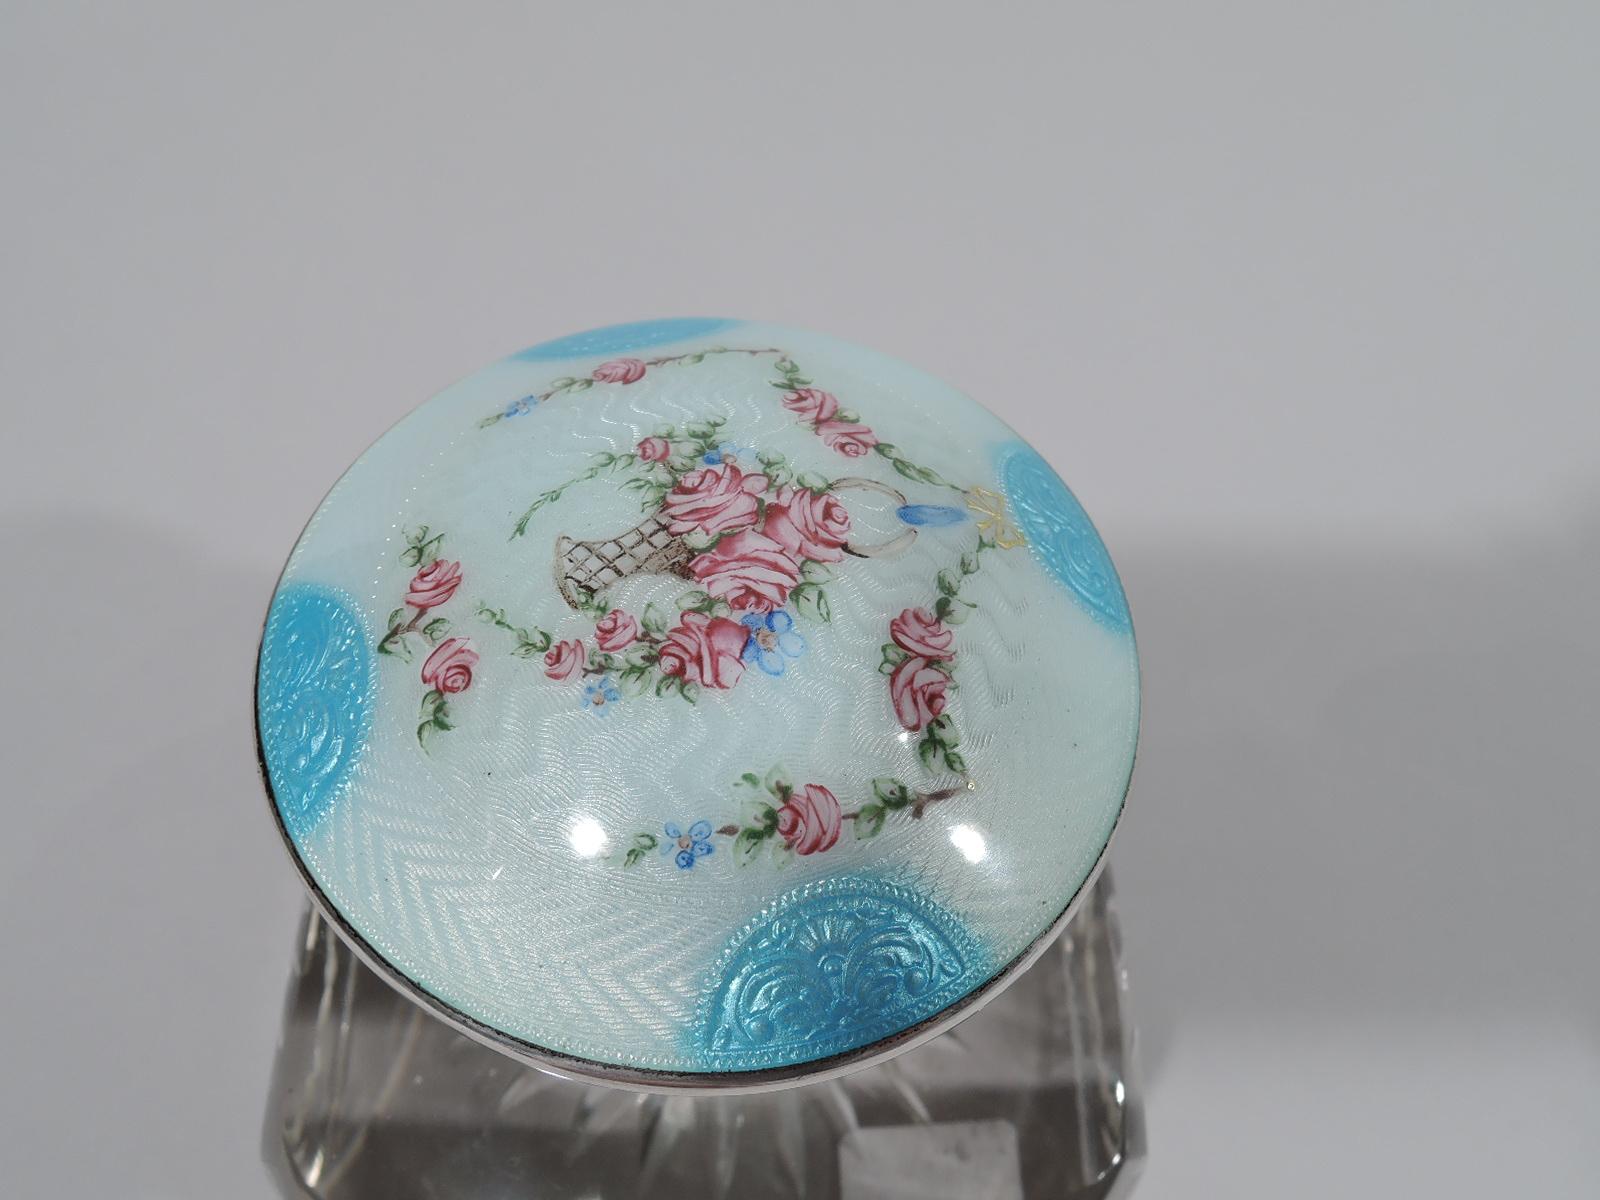 20th Century Antique Edwardian Sterling Silver and Enamel Inkwell by Foster & Bailey For Sale